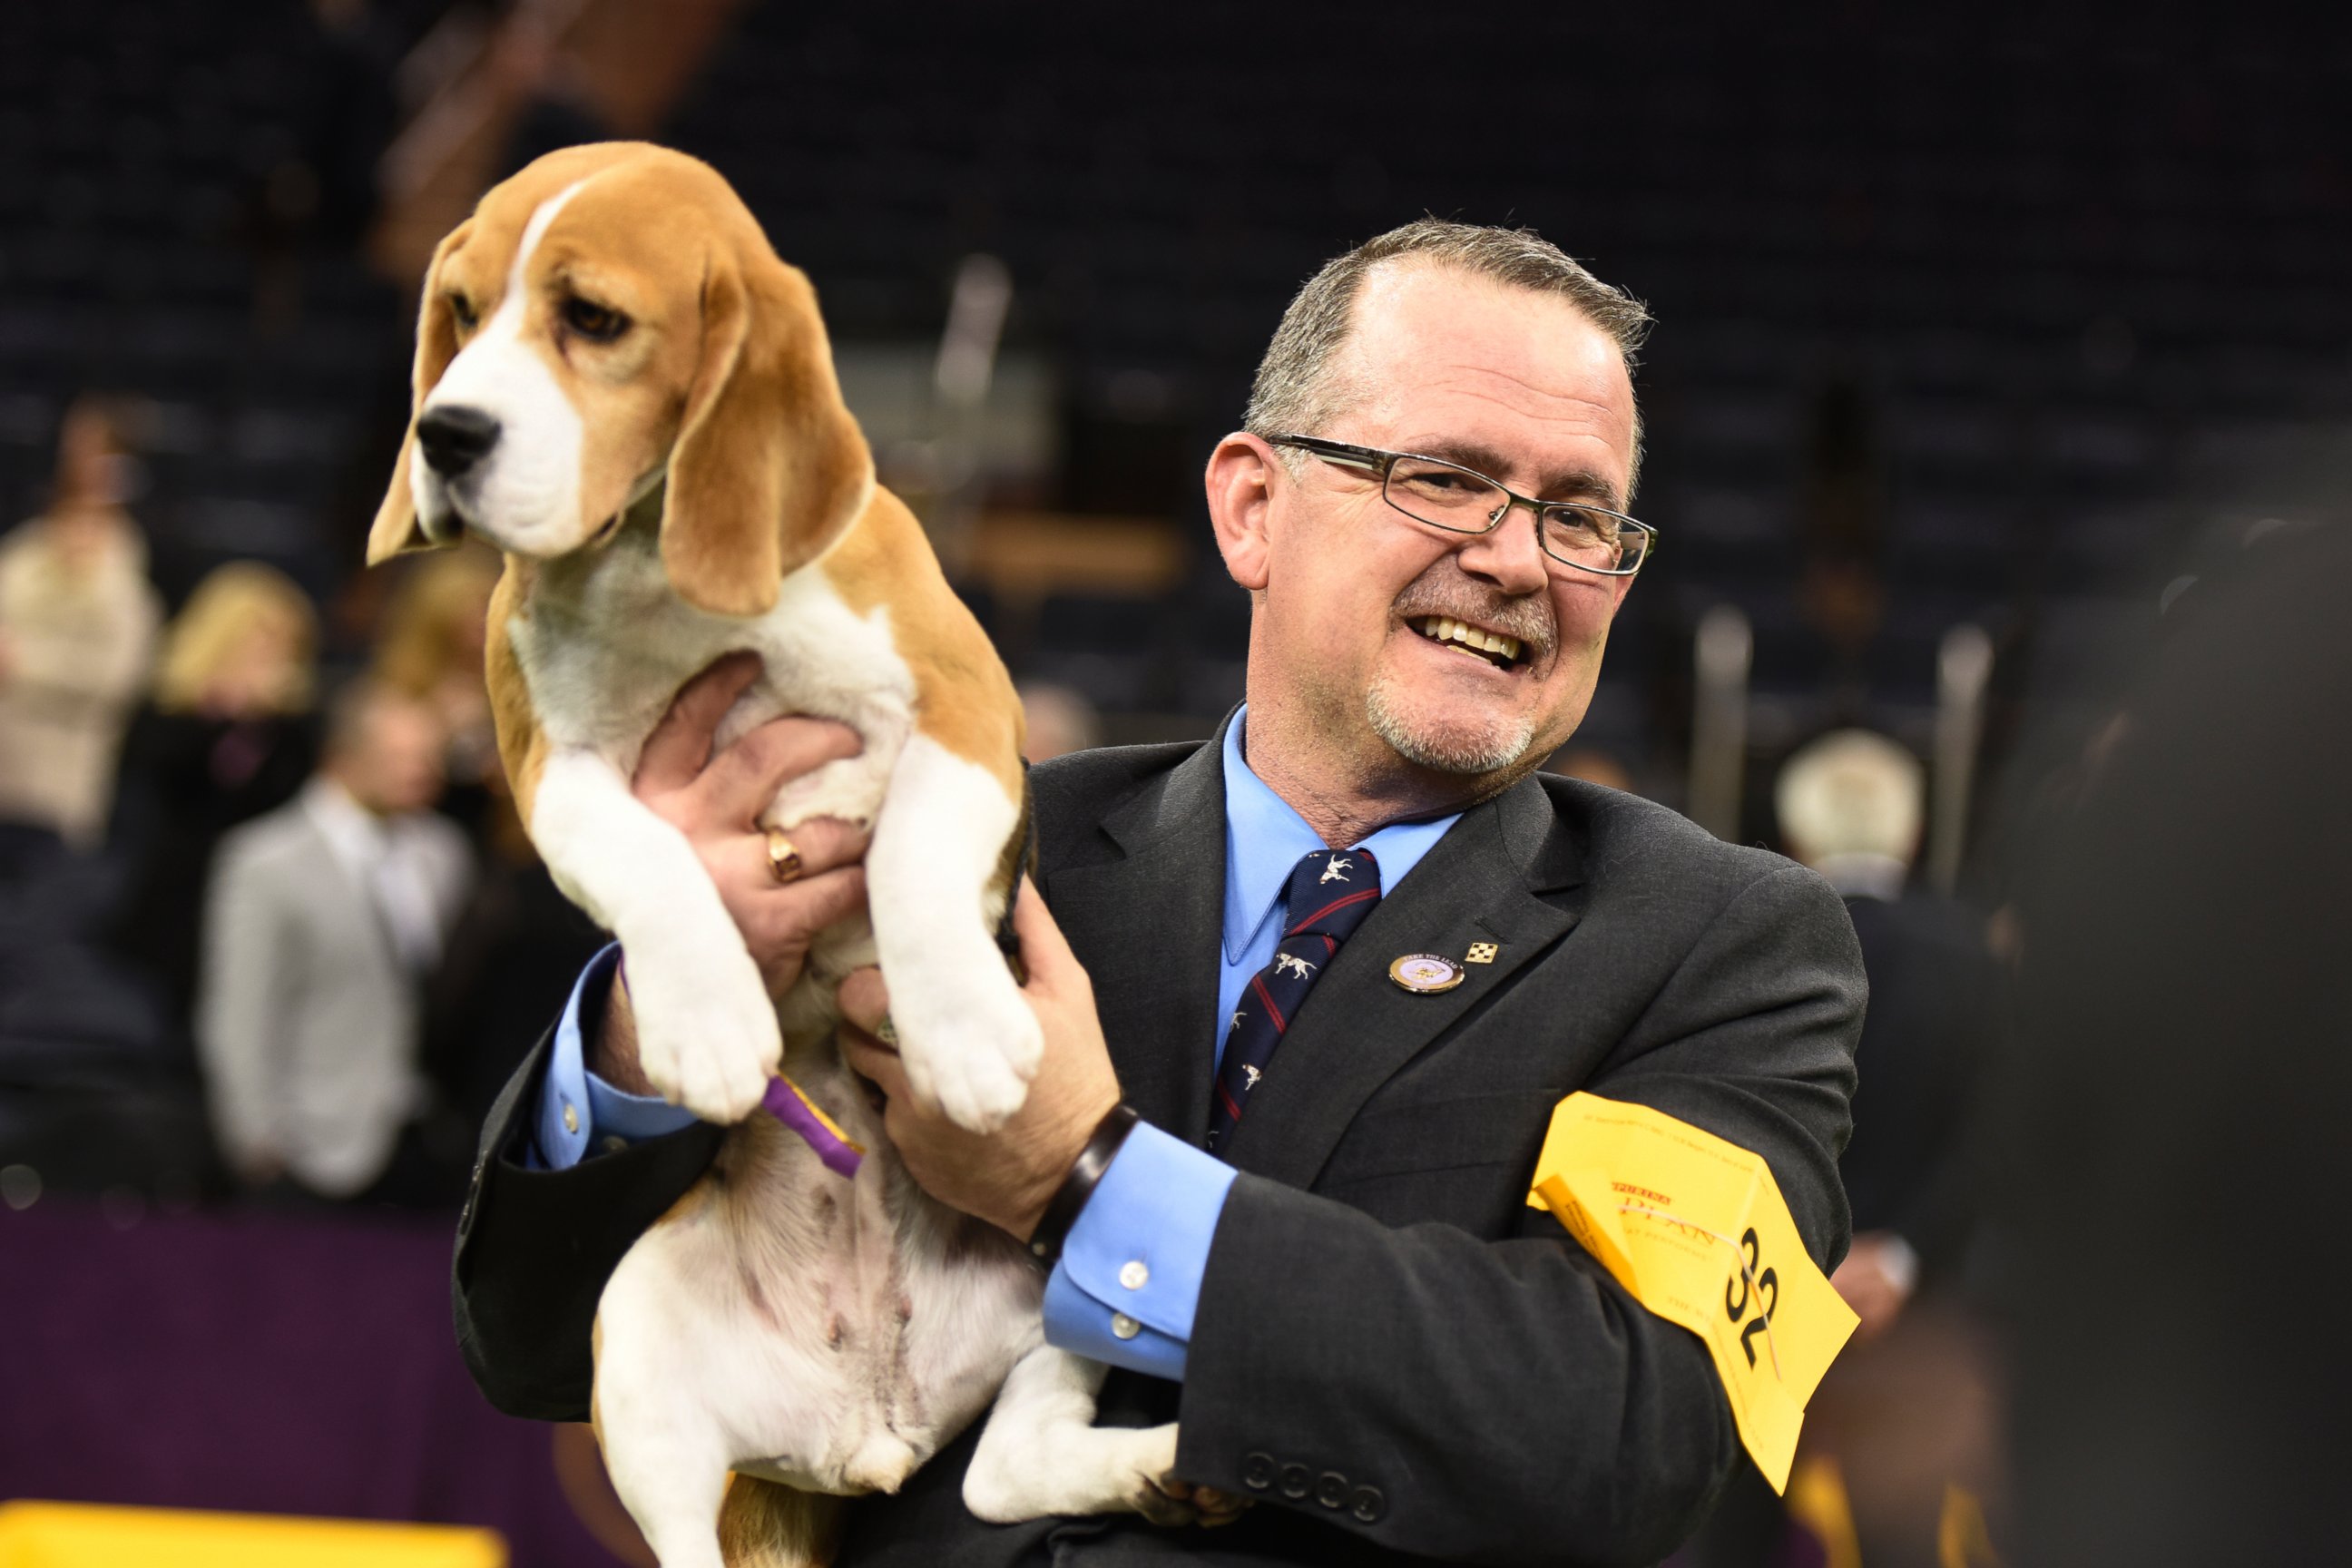 PHOTO: "Best in Show Winner" Miss P is pictured during the 139th Annual Westminster Kennel Club Dog Show at Madison Square Garden in New York City on Feb. 17, 2014.